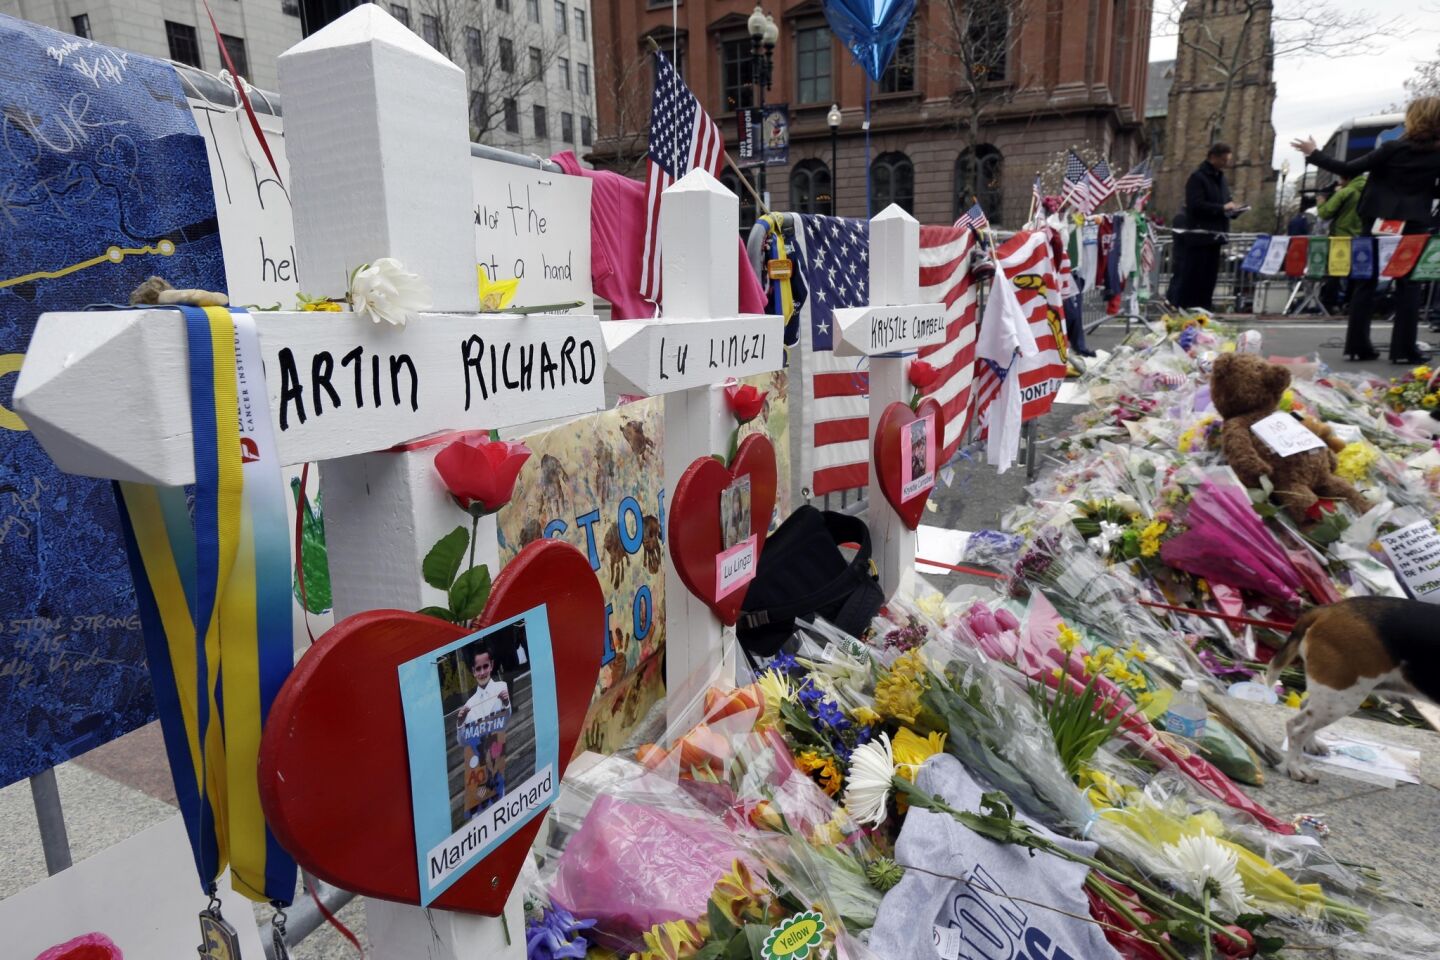 Memorials for Martin Richard, Lingzi Lu and Krystle Campbell, killed in the Boston Marathon bombings, stand among other artifacts at a memorial in Boston's Copley Square. The crosses and other items from the memorial are part of the exhibit opening April 7 in the Central Library in Copley Square.